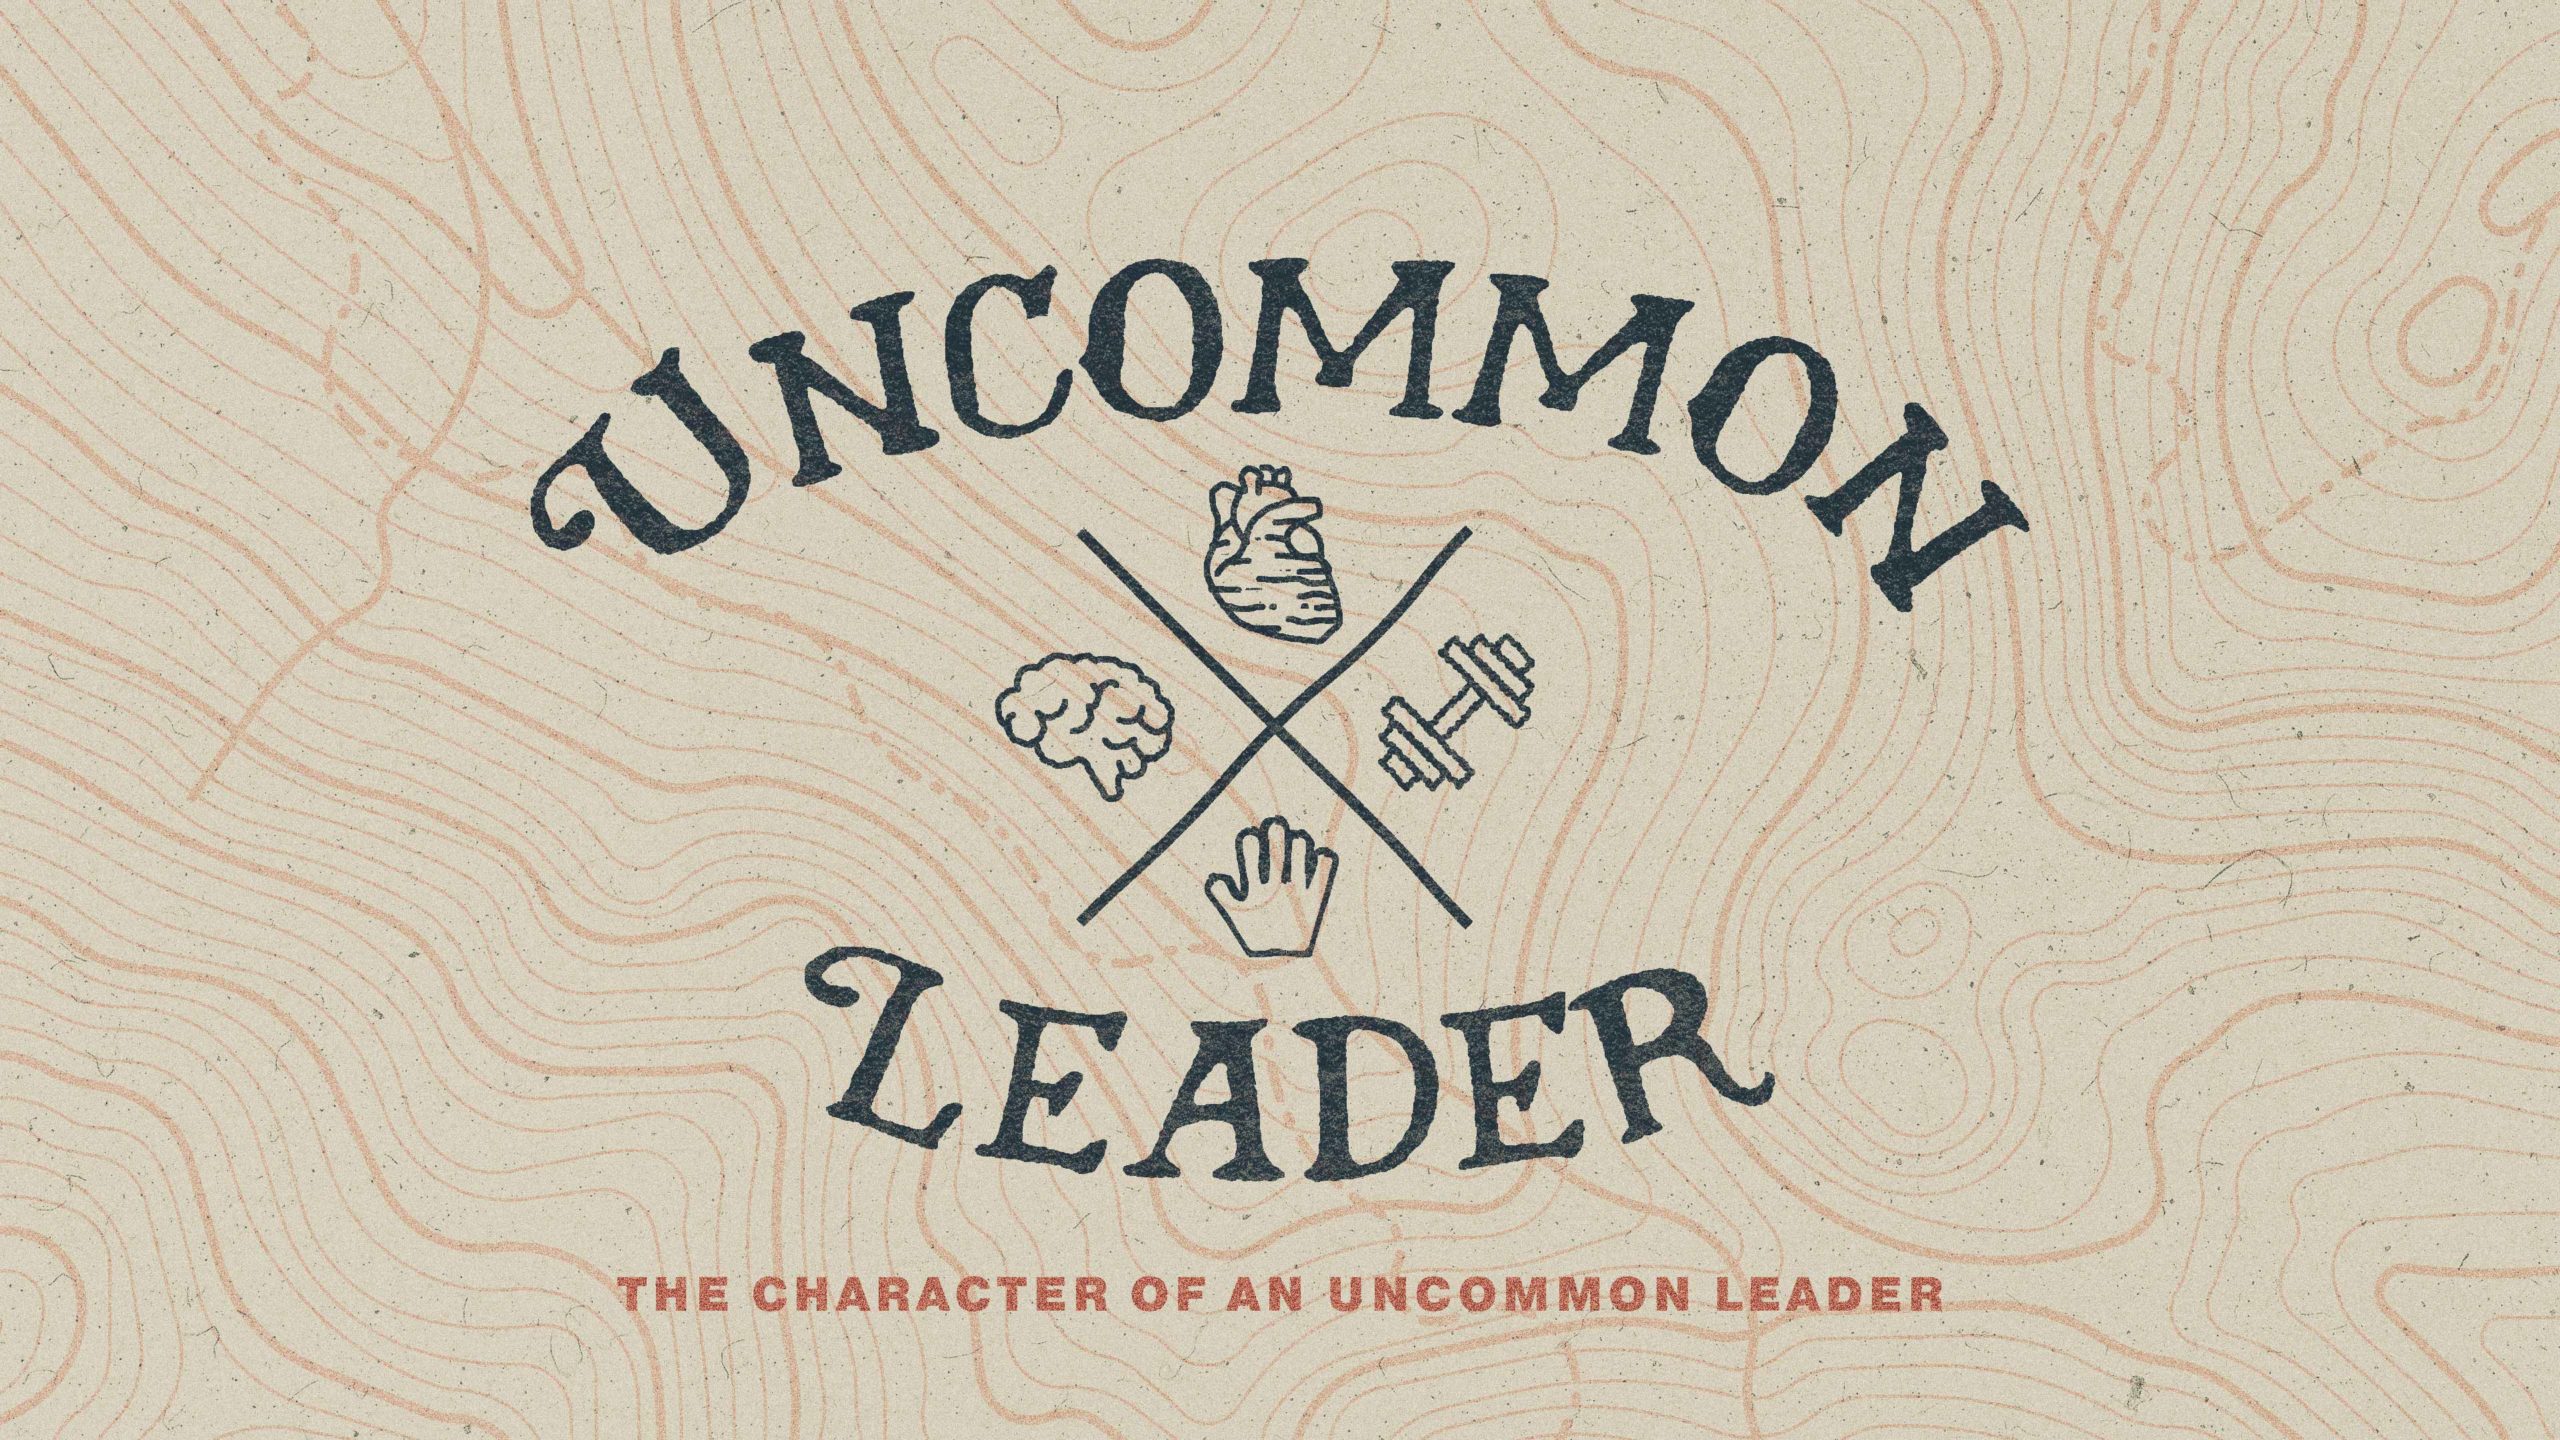 The Character of an Uncommon Leader